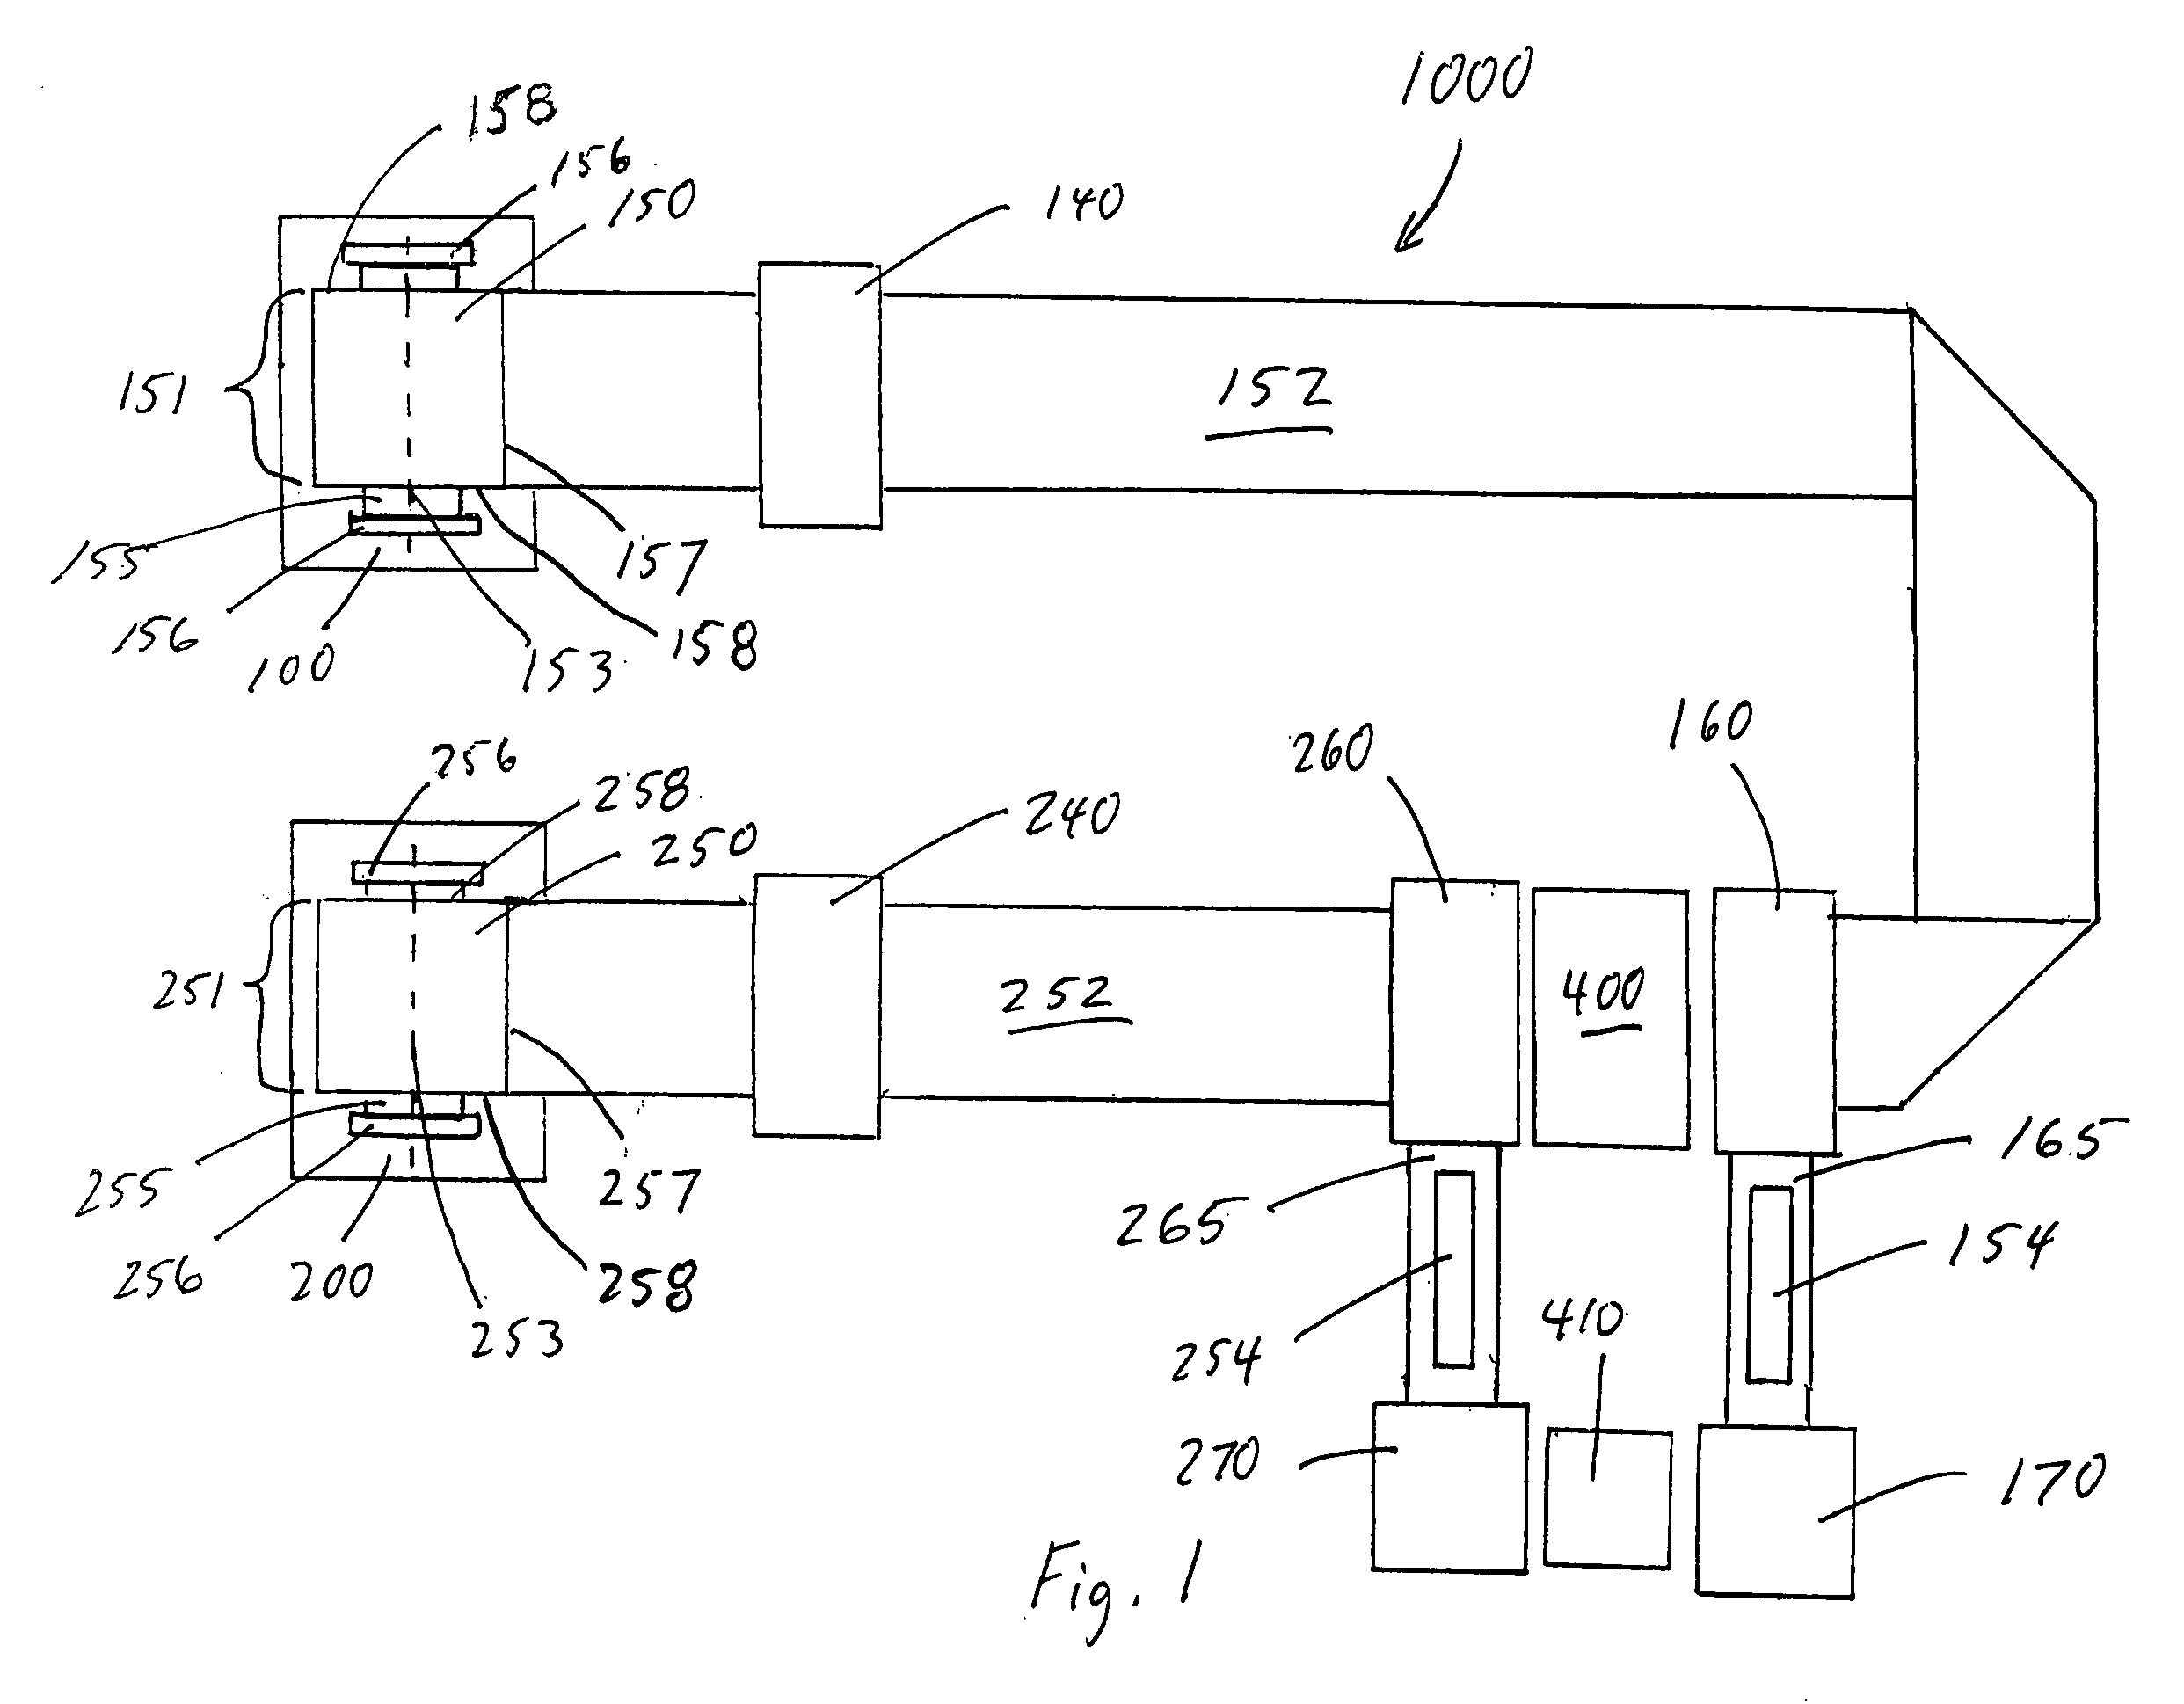 Apparatus and method for the concurrent converting of multiple web materials